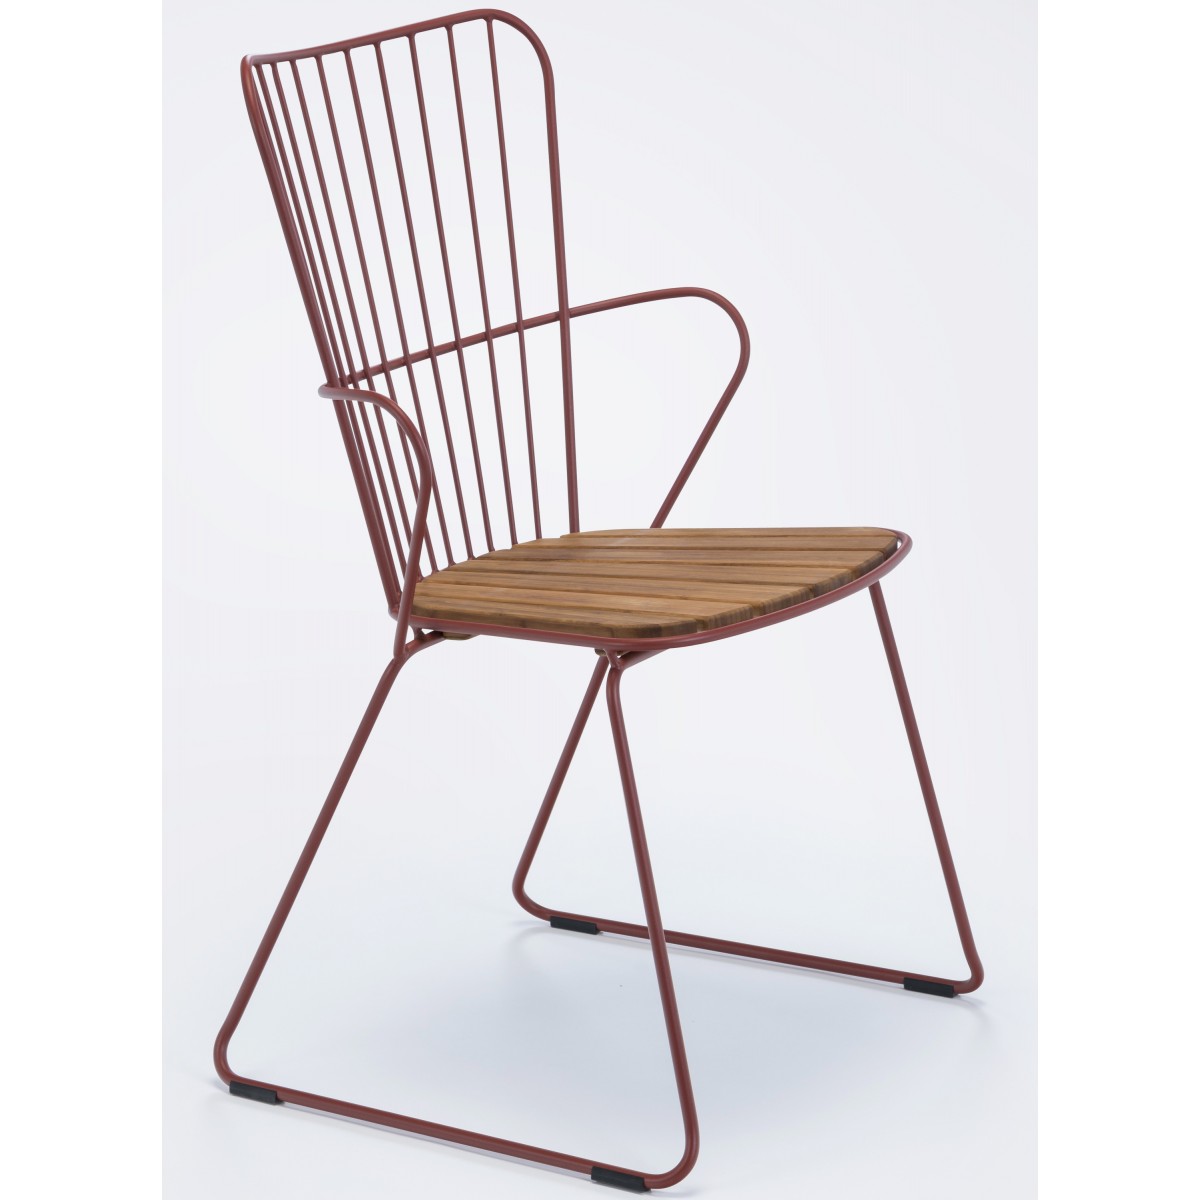 paprika (19) - Paon dining chair